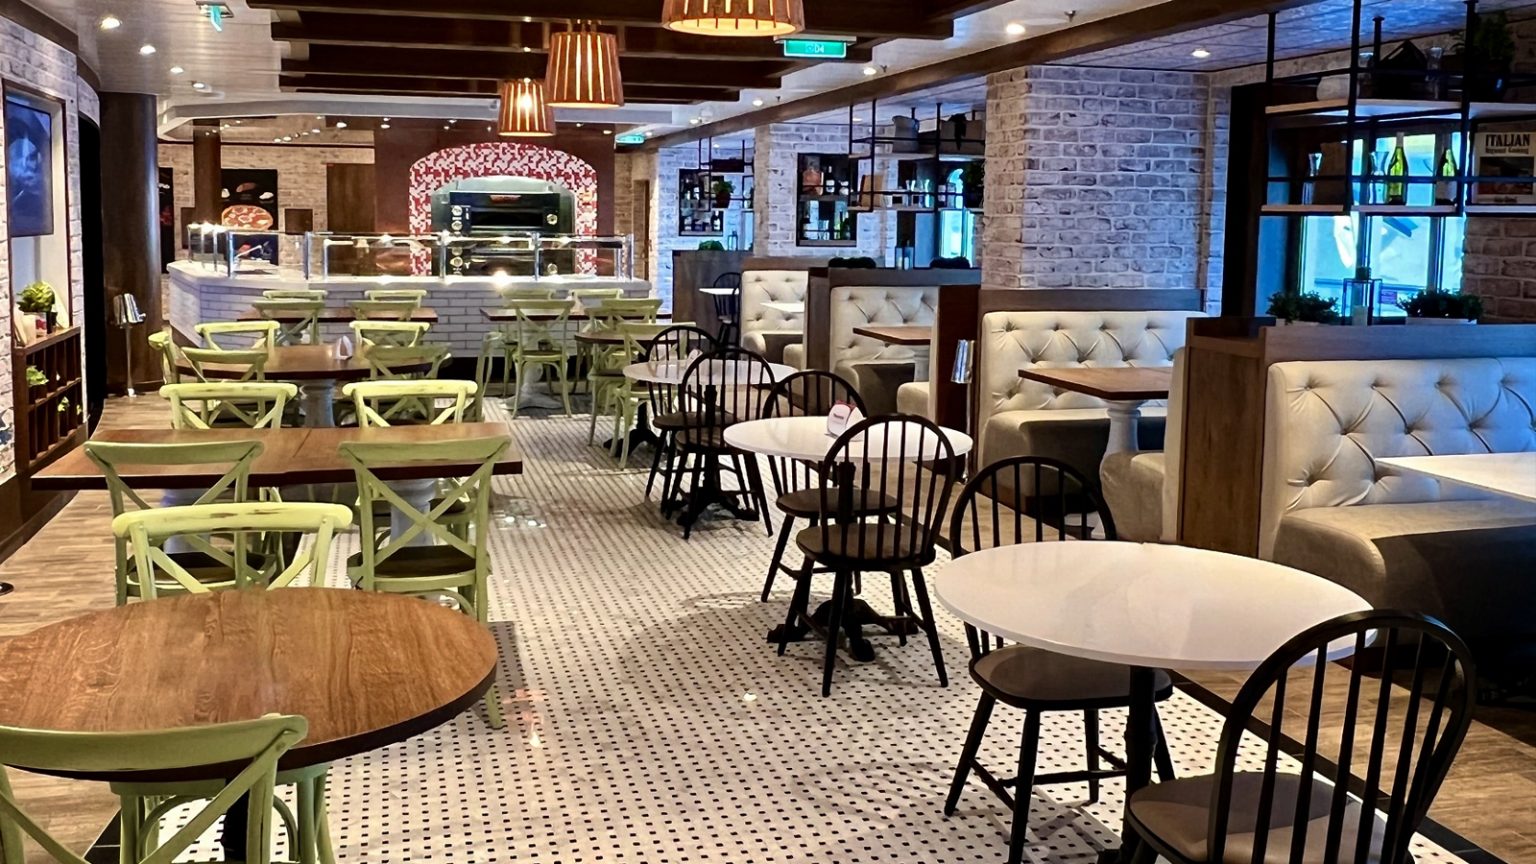 New Dining and Bar Details for Wonder of the Seas - Cruise Spotlight